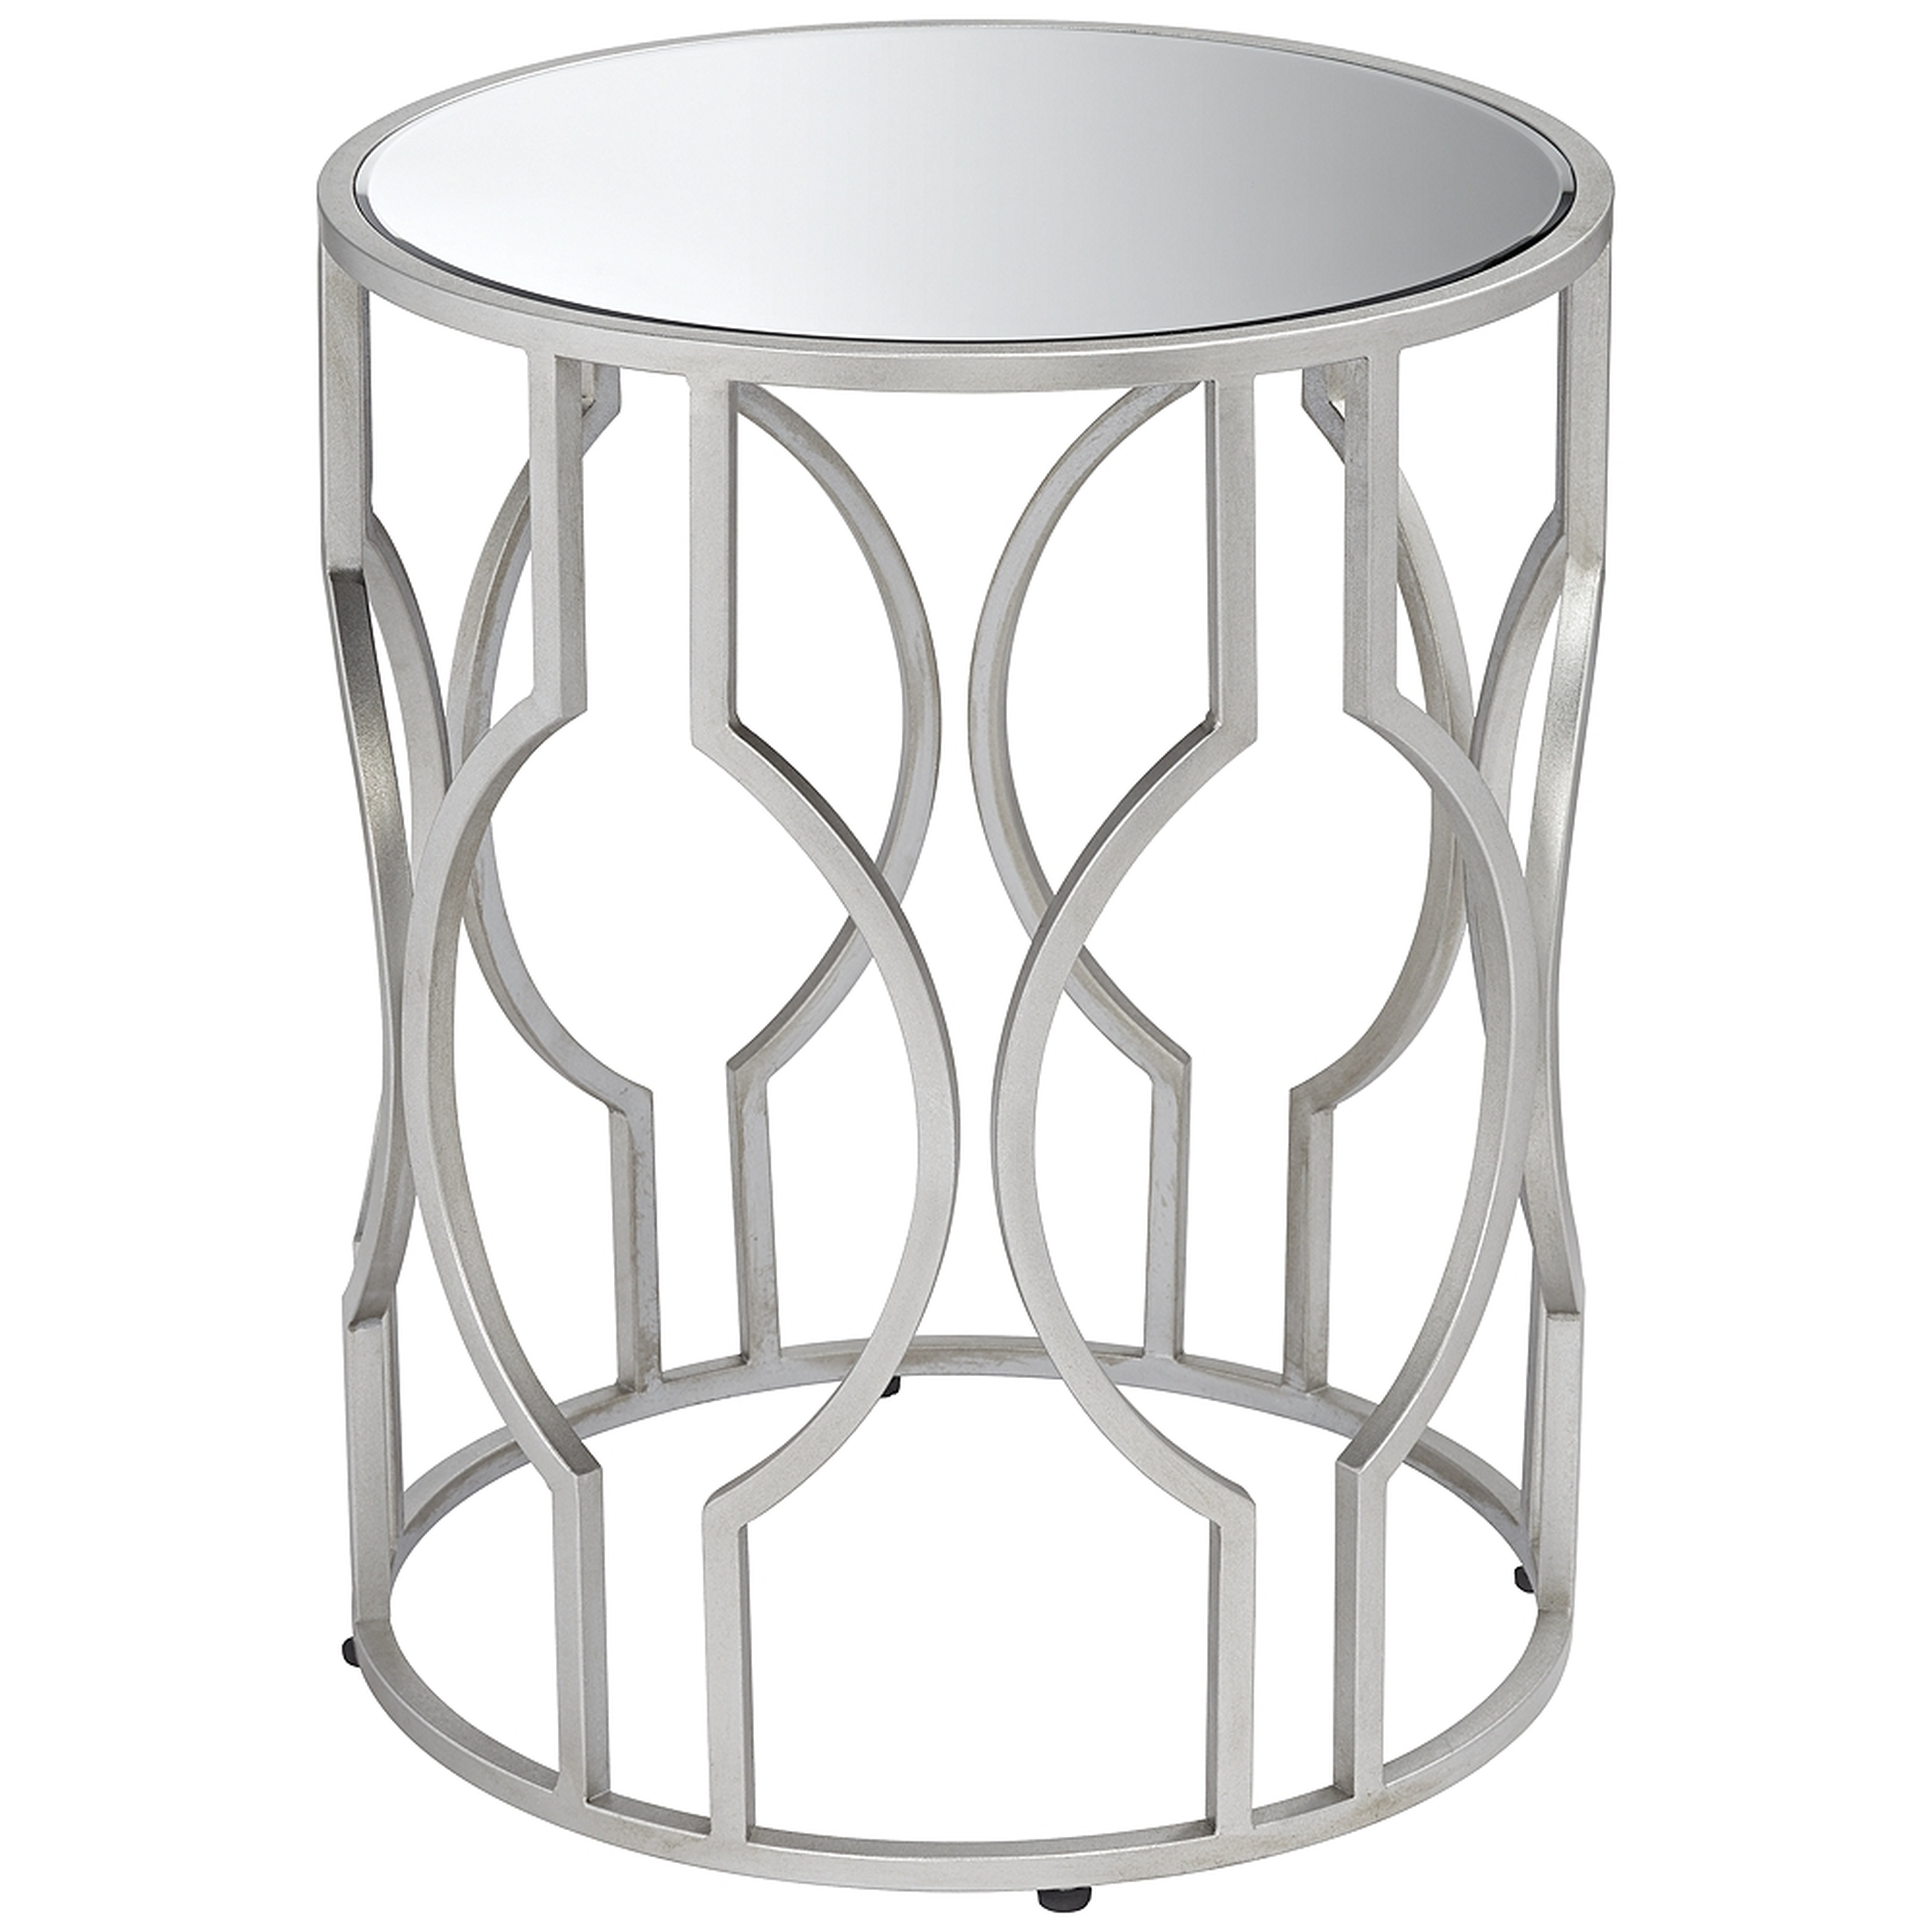 Fara Mirrored Top and Silver Openwork Round End Table - Style # 46H79 - Lamps Plus